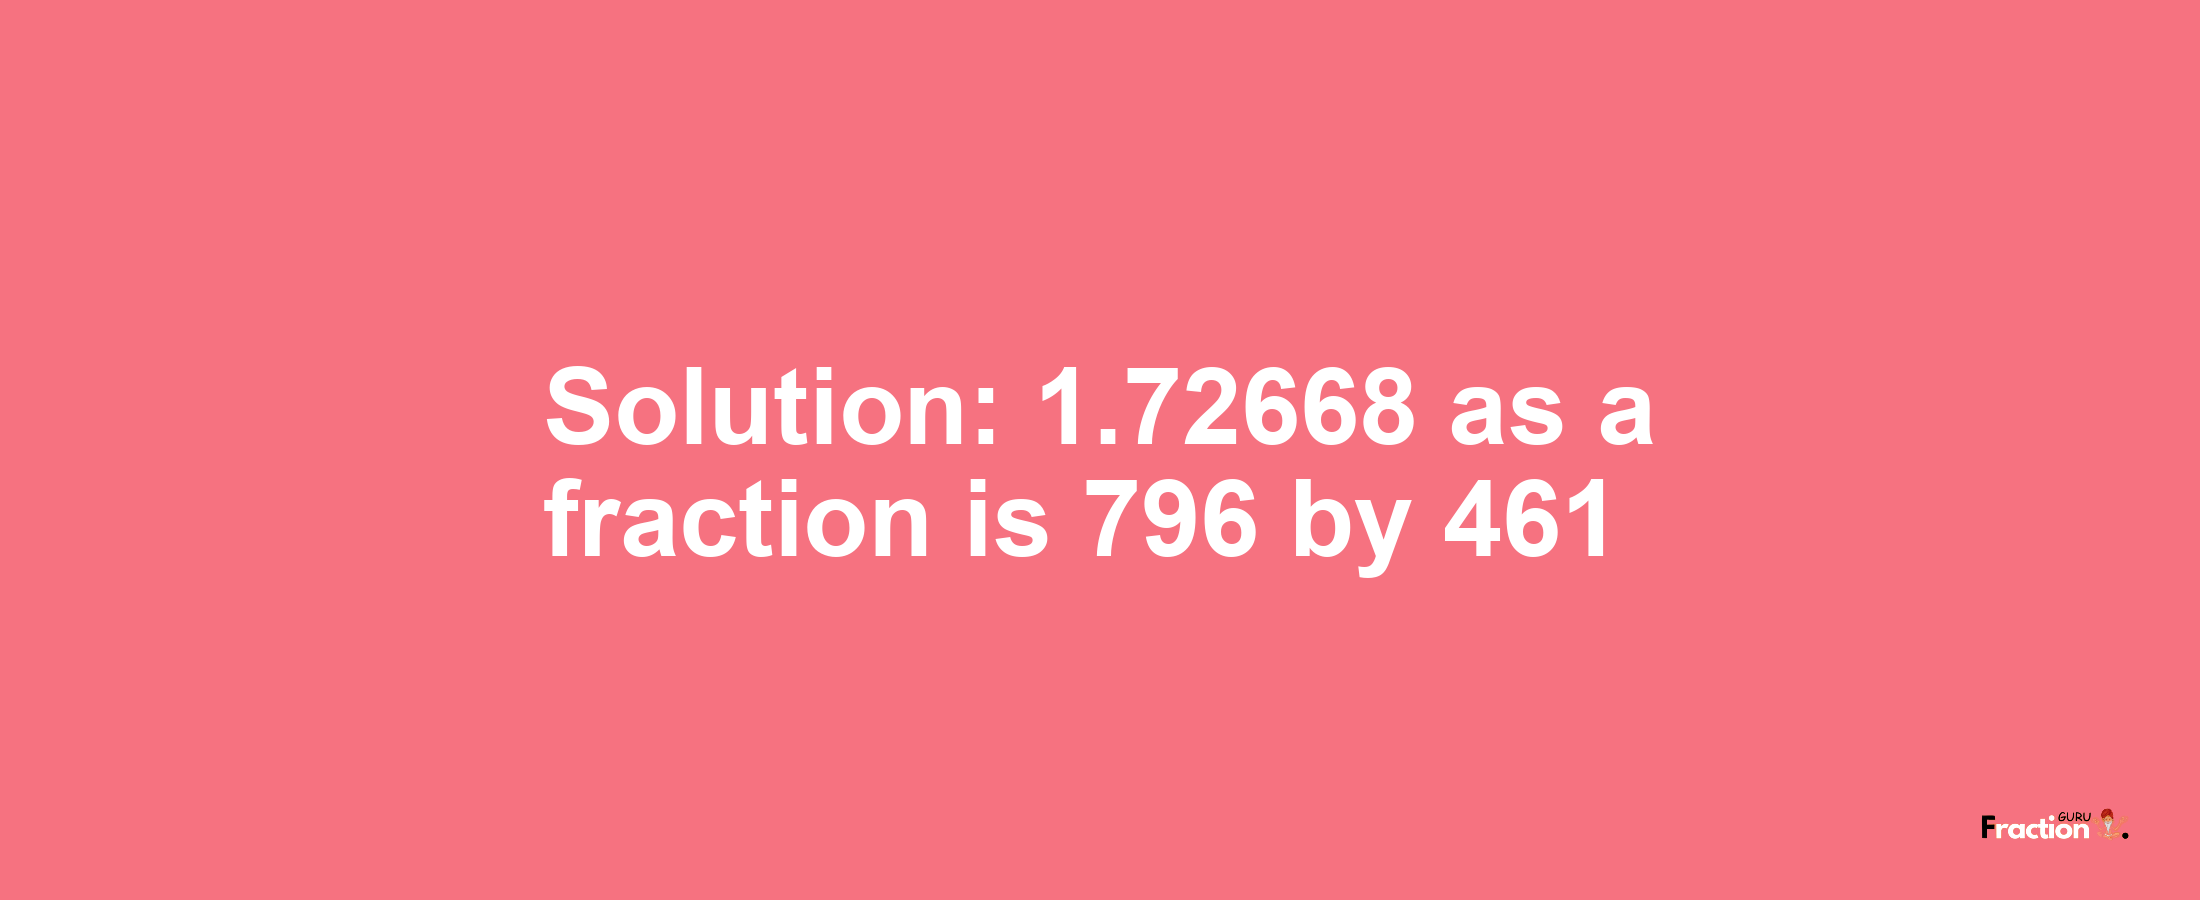 Solution:1.72668 as a fraction is 796/461